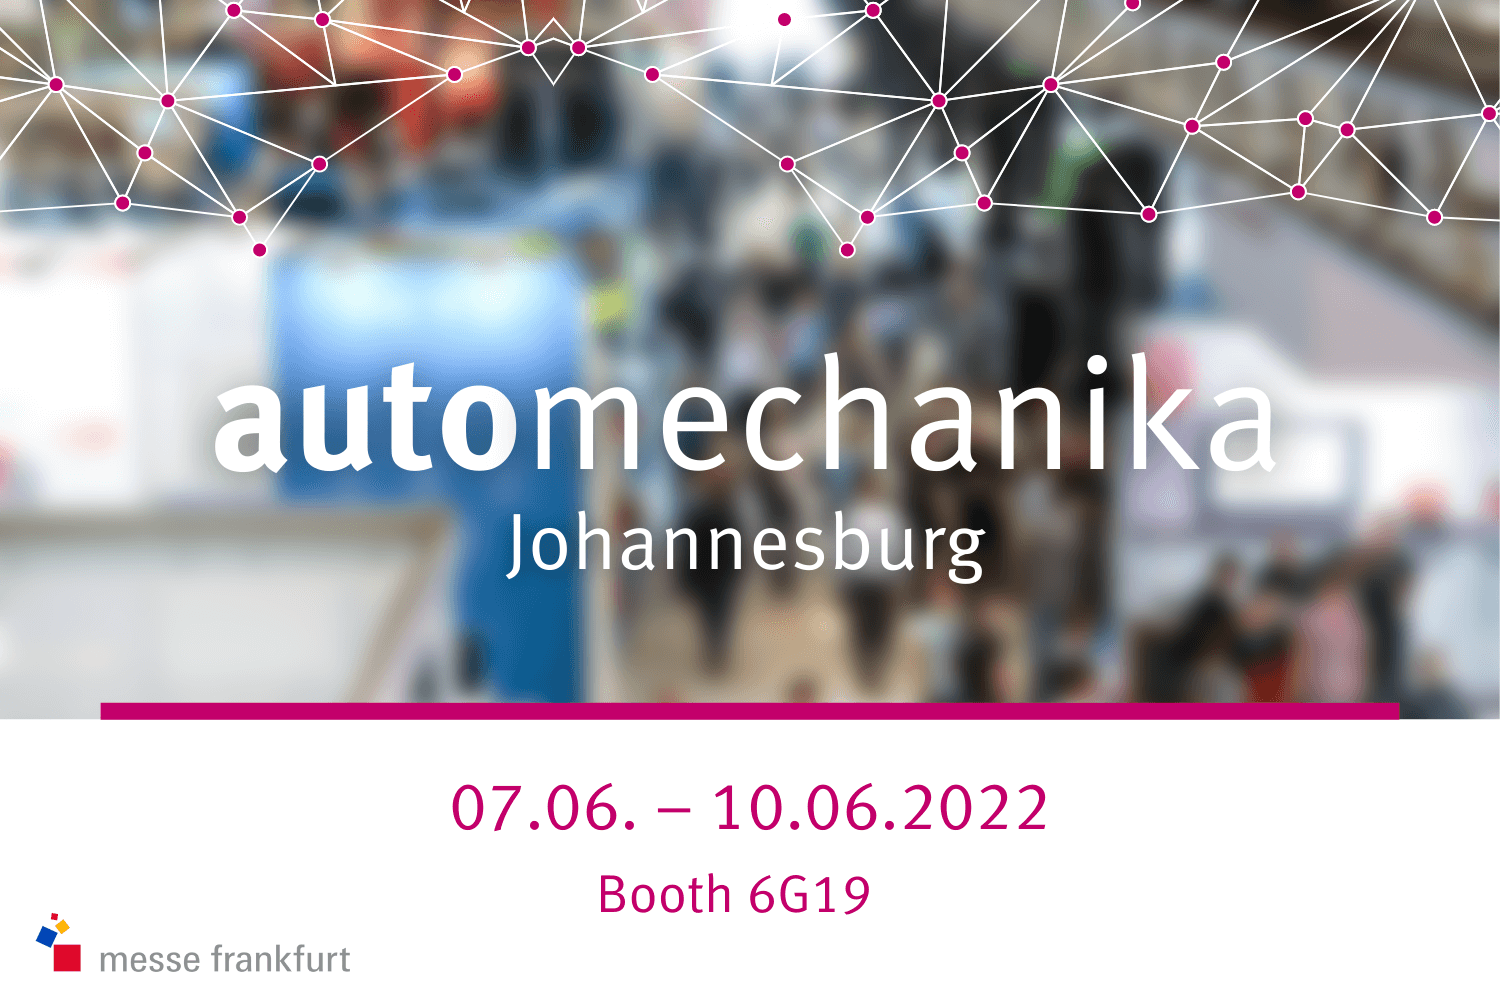 Soloplan at the Automechanika in Johannesburg